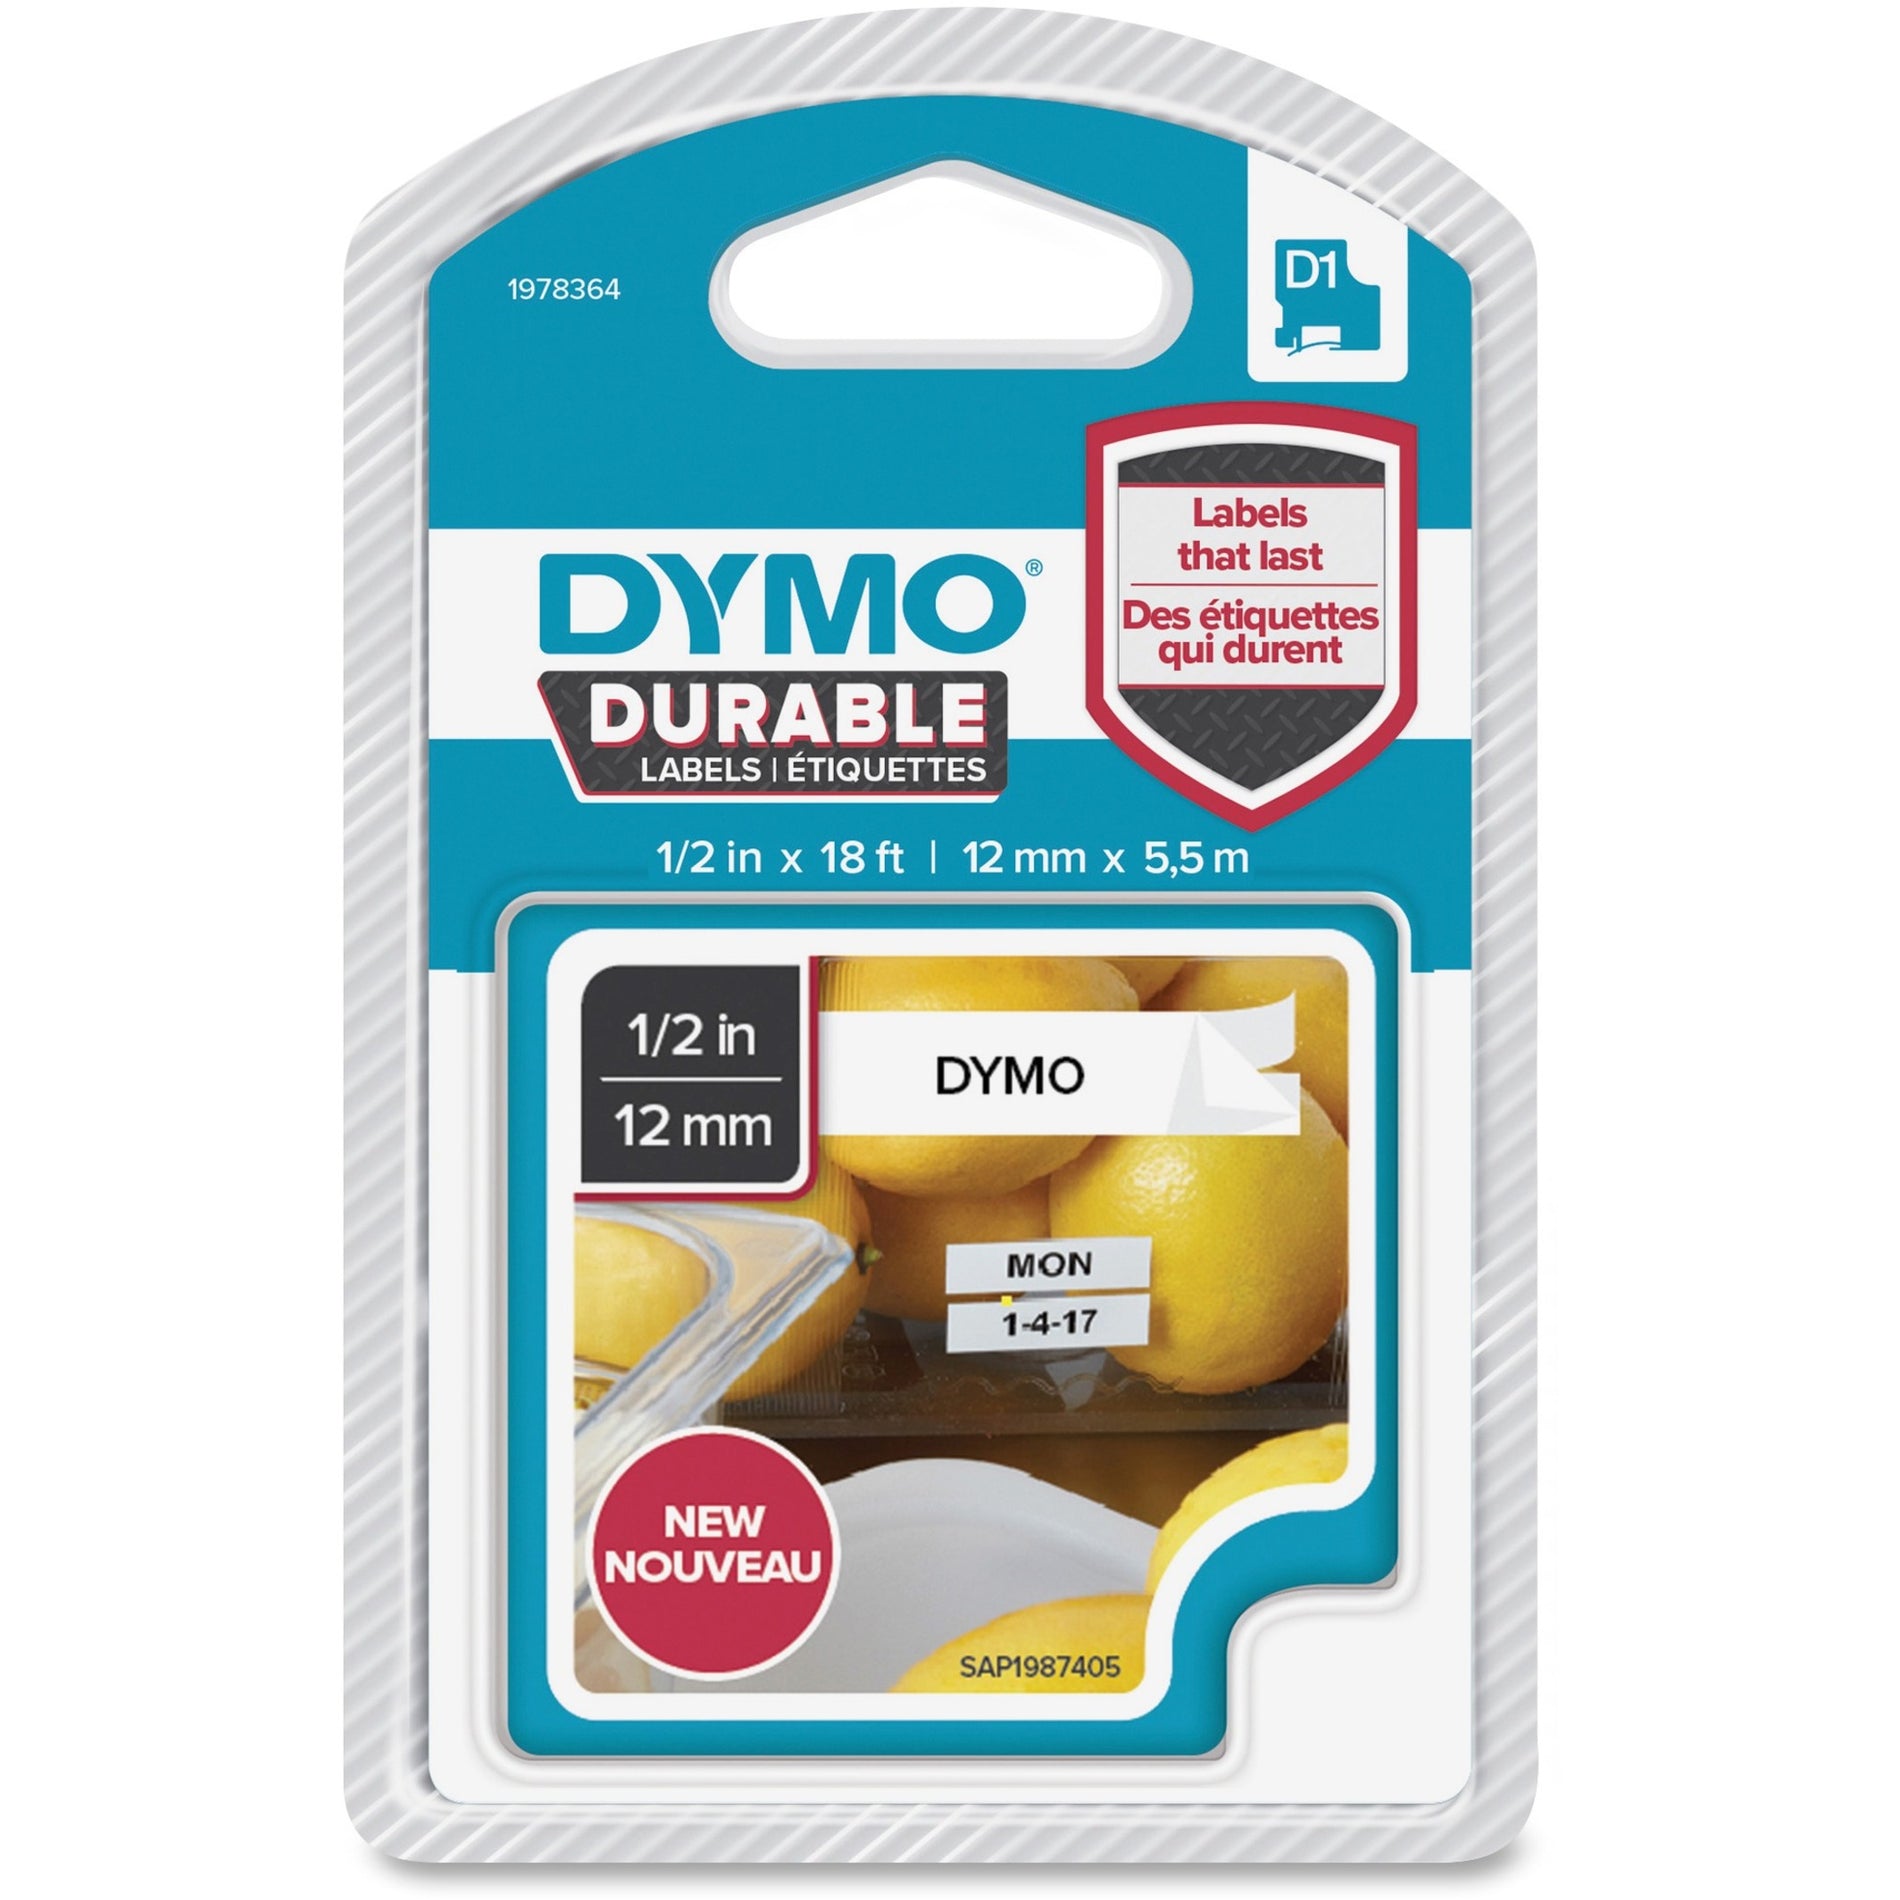 Dymo 1978364 D1 Durable Labels, Weather Resistant, Scratch Resistant, Fade Resistant, 1/2" White